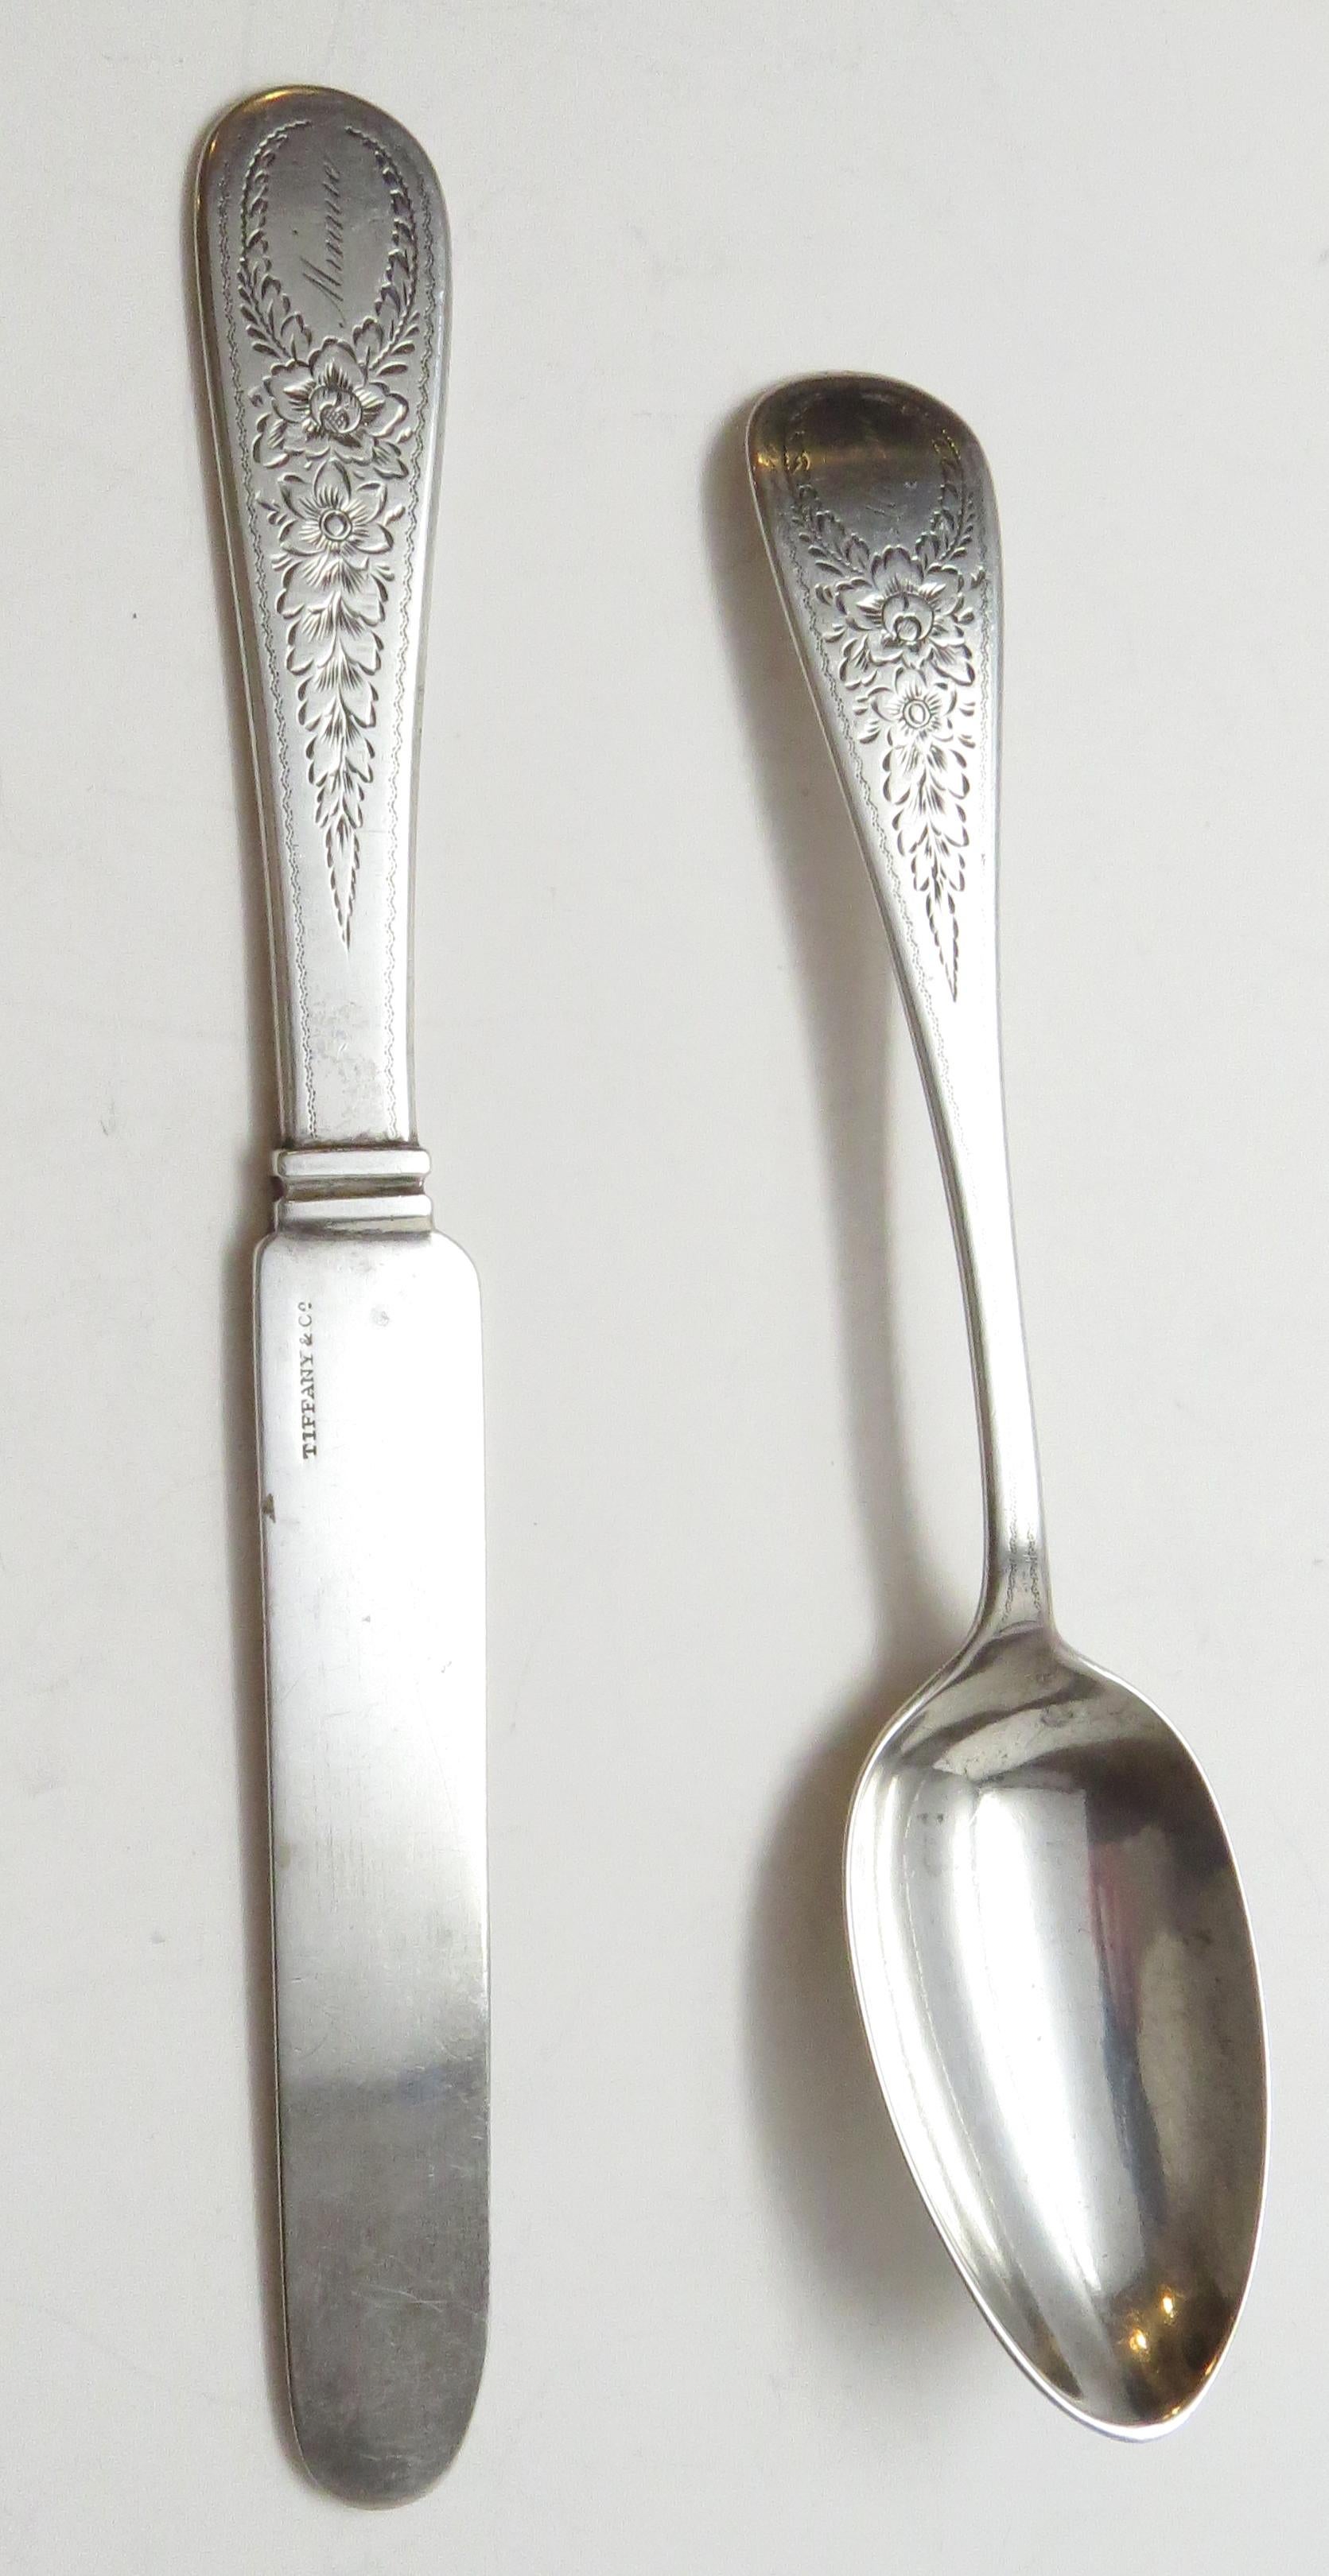 John Polhamus for Tiffany & Co. Sterling Silver Spoon and Knife, J*P In Good Condition For Sale In Washington Depot, CT